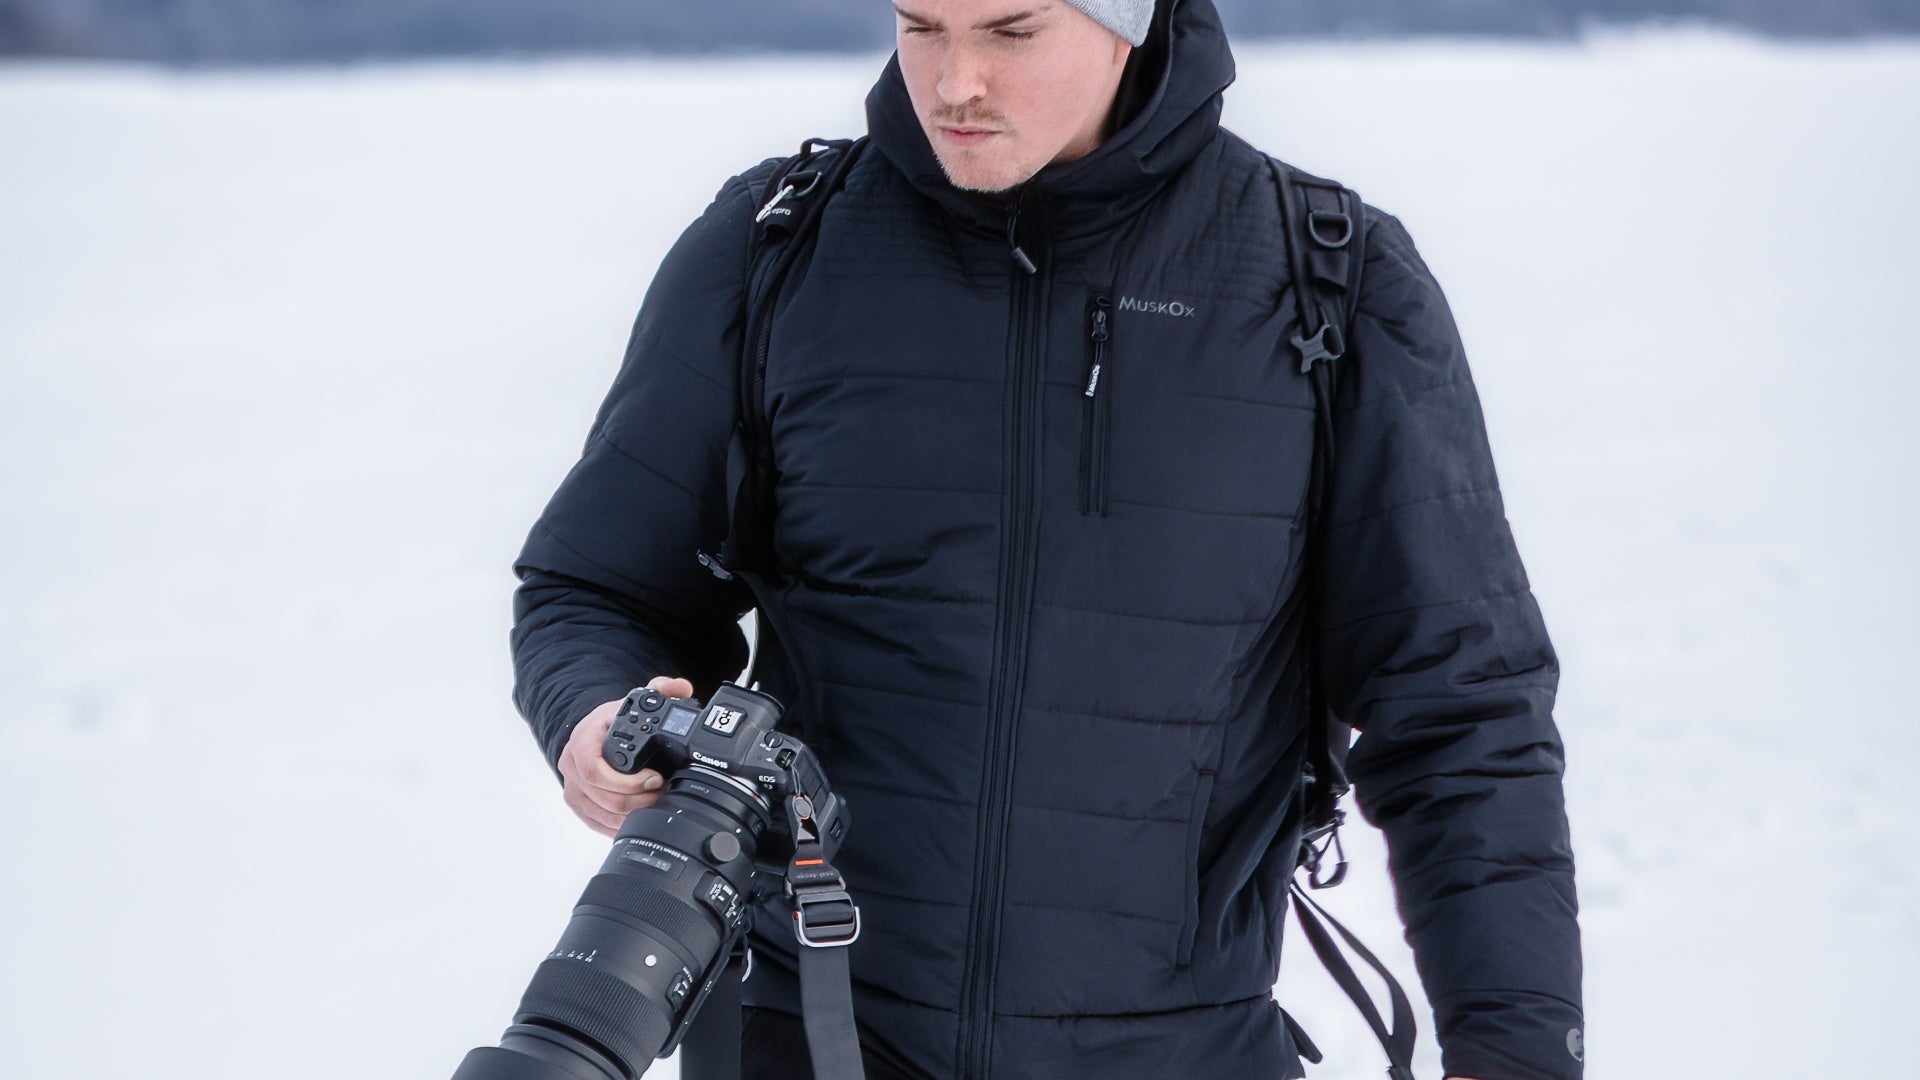 Photo taken by NickByNorthwest. MuskOx Insulated Wrangell Puffer Jacket. Performance Men's Outerwear by MuskOx Men's Outdoor Apparel. Lab Certified Insulated Jacket to keep you warm in negative conditions.